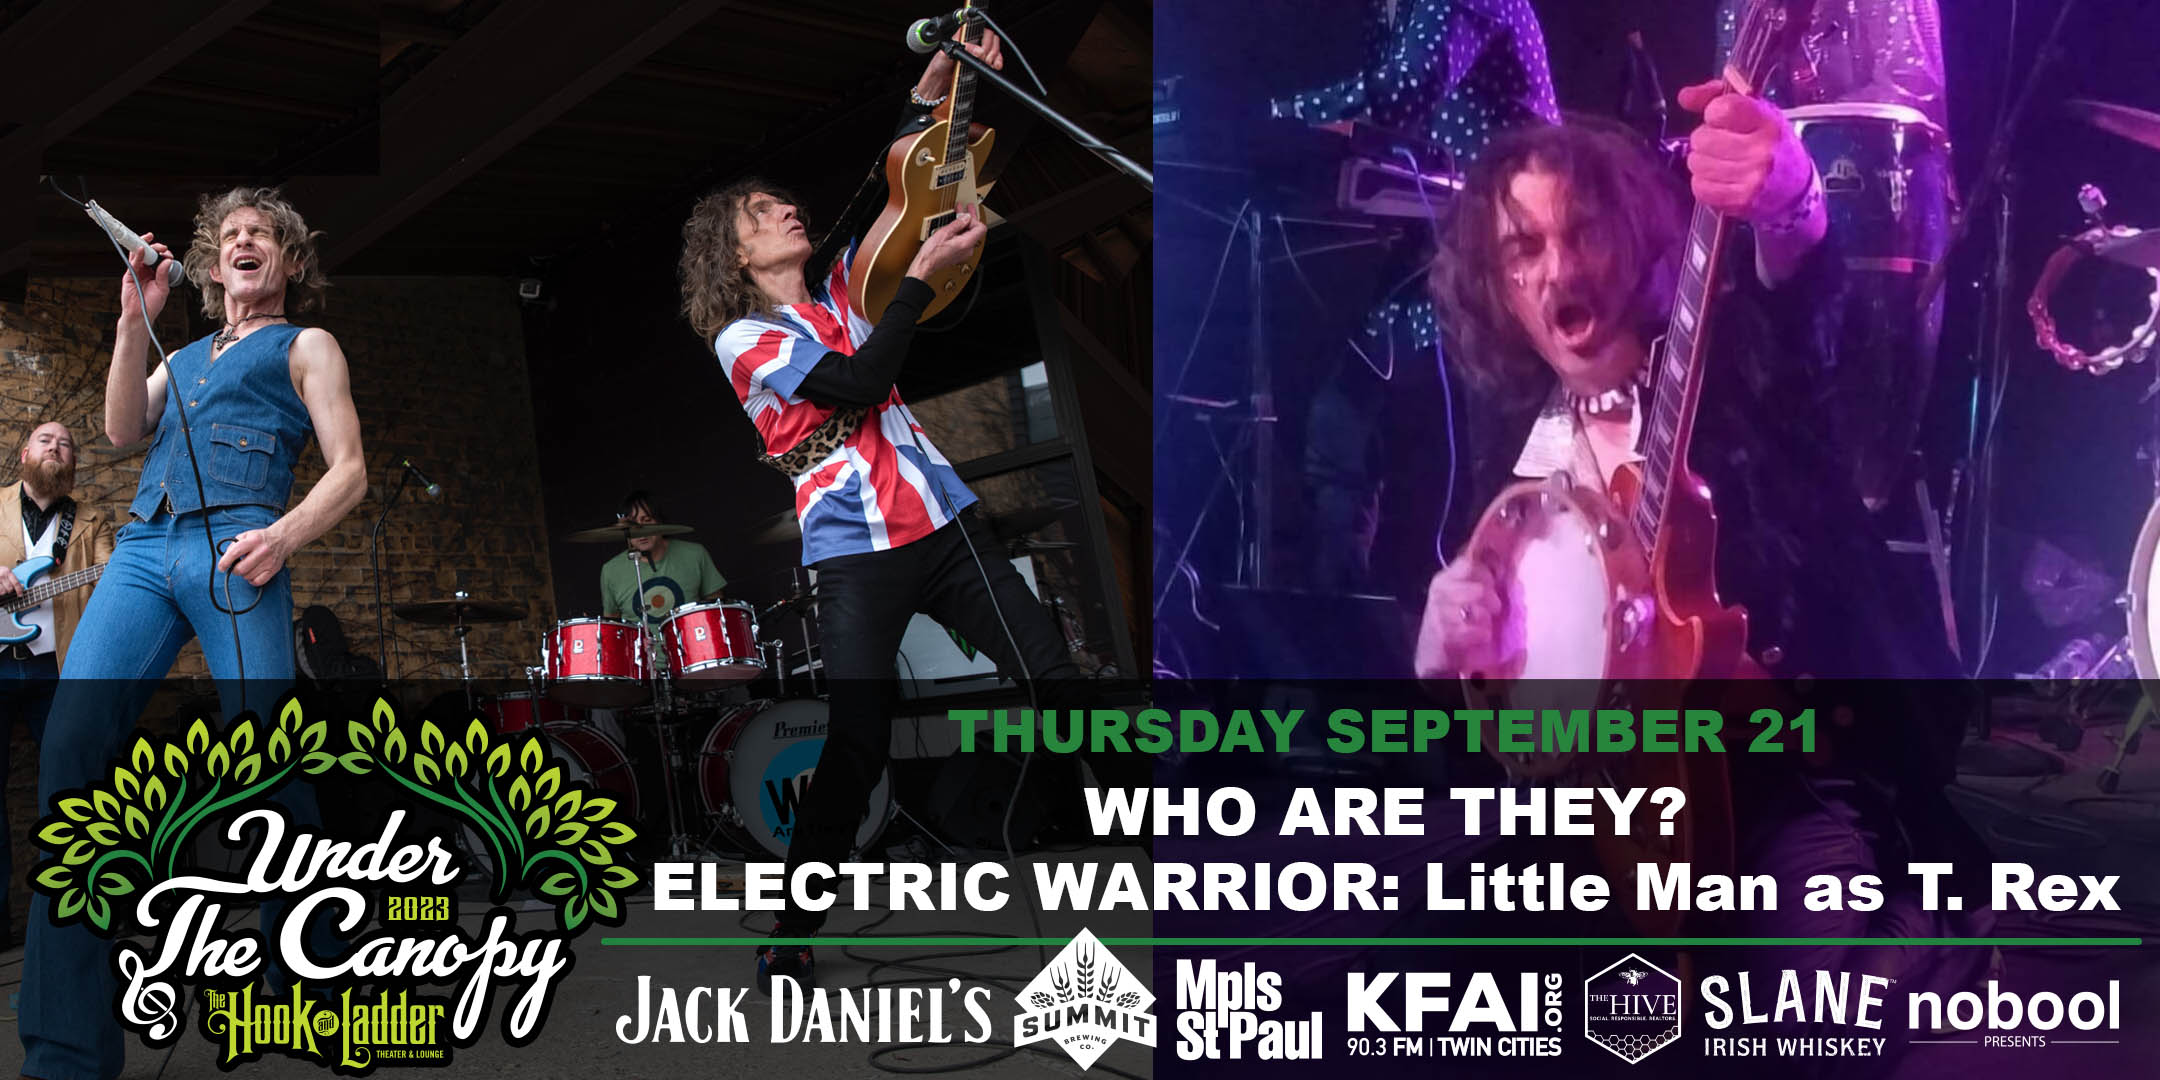 Who Are They? / Electric Warrior: Little Man as T. Rex Thursday, September 21, 2023 Under The Canopy at The Hook and Ladder Theater "An Urban Outdoor Summer Concert Series" Doors 6:00pm :: Music 7:00pm :: 21+ Reserved Seats: $25 GA: $15 ADV / $20 DOS